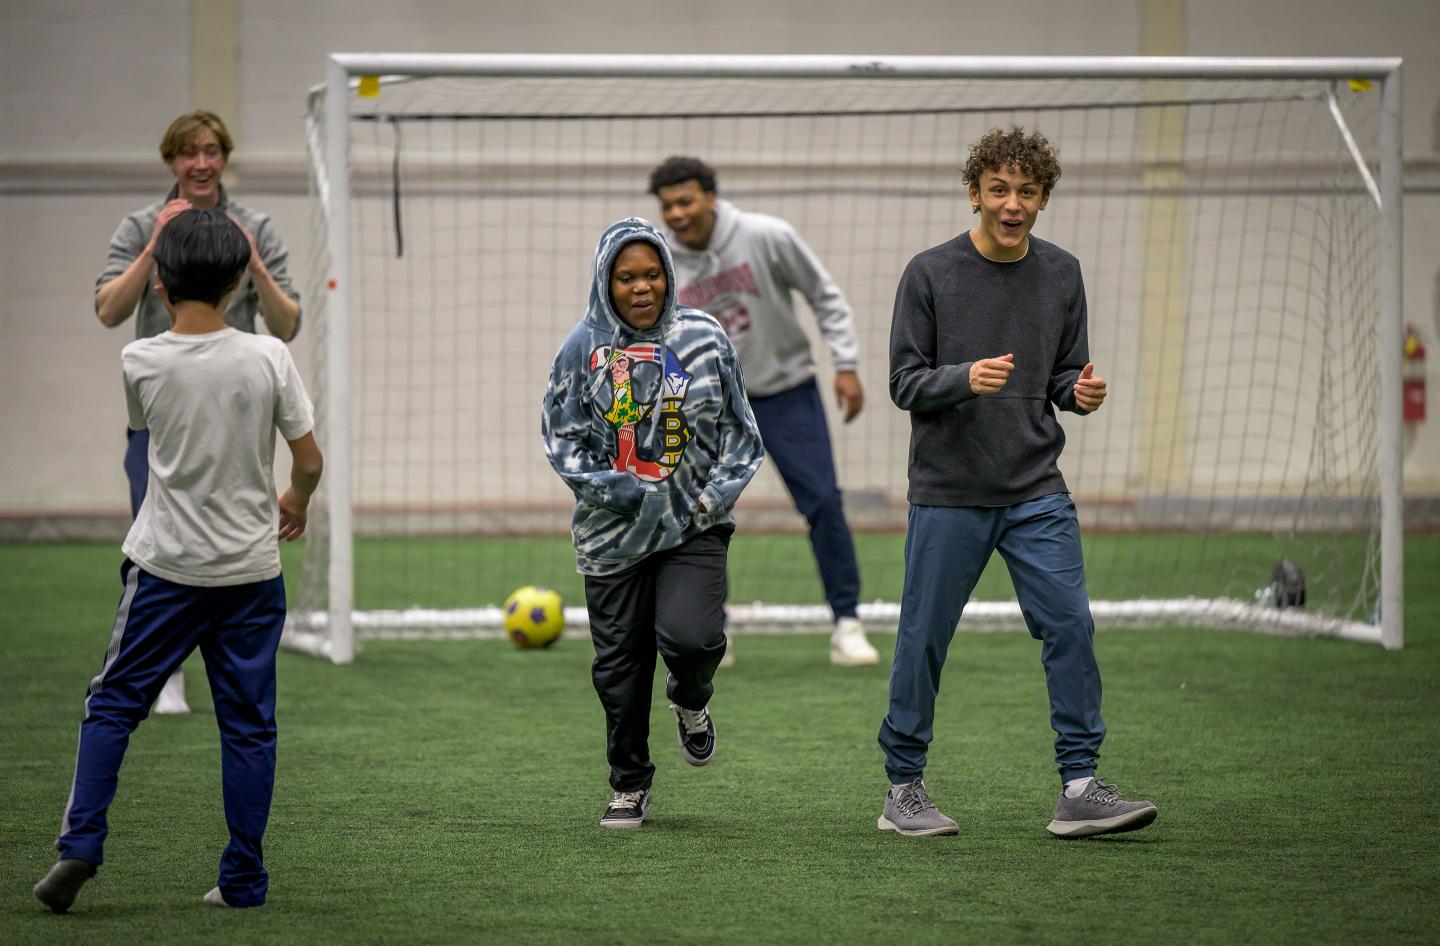 Playing soccer with Friends Program mentees